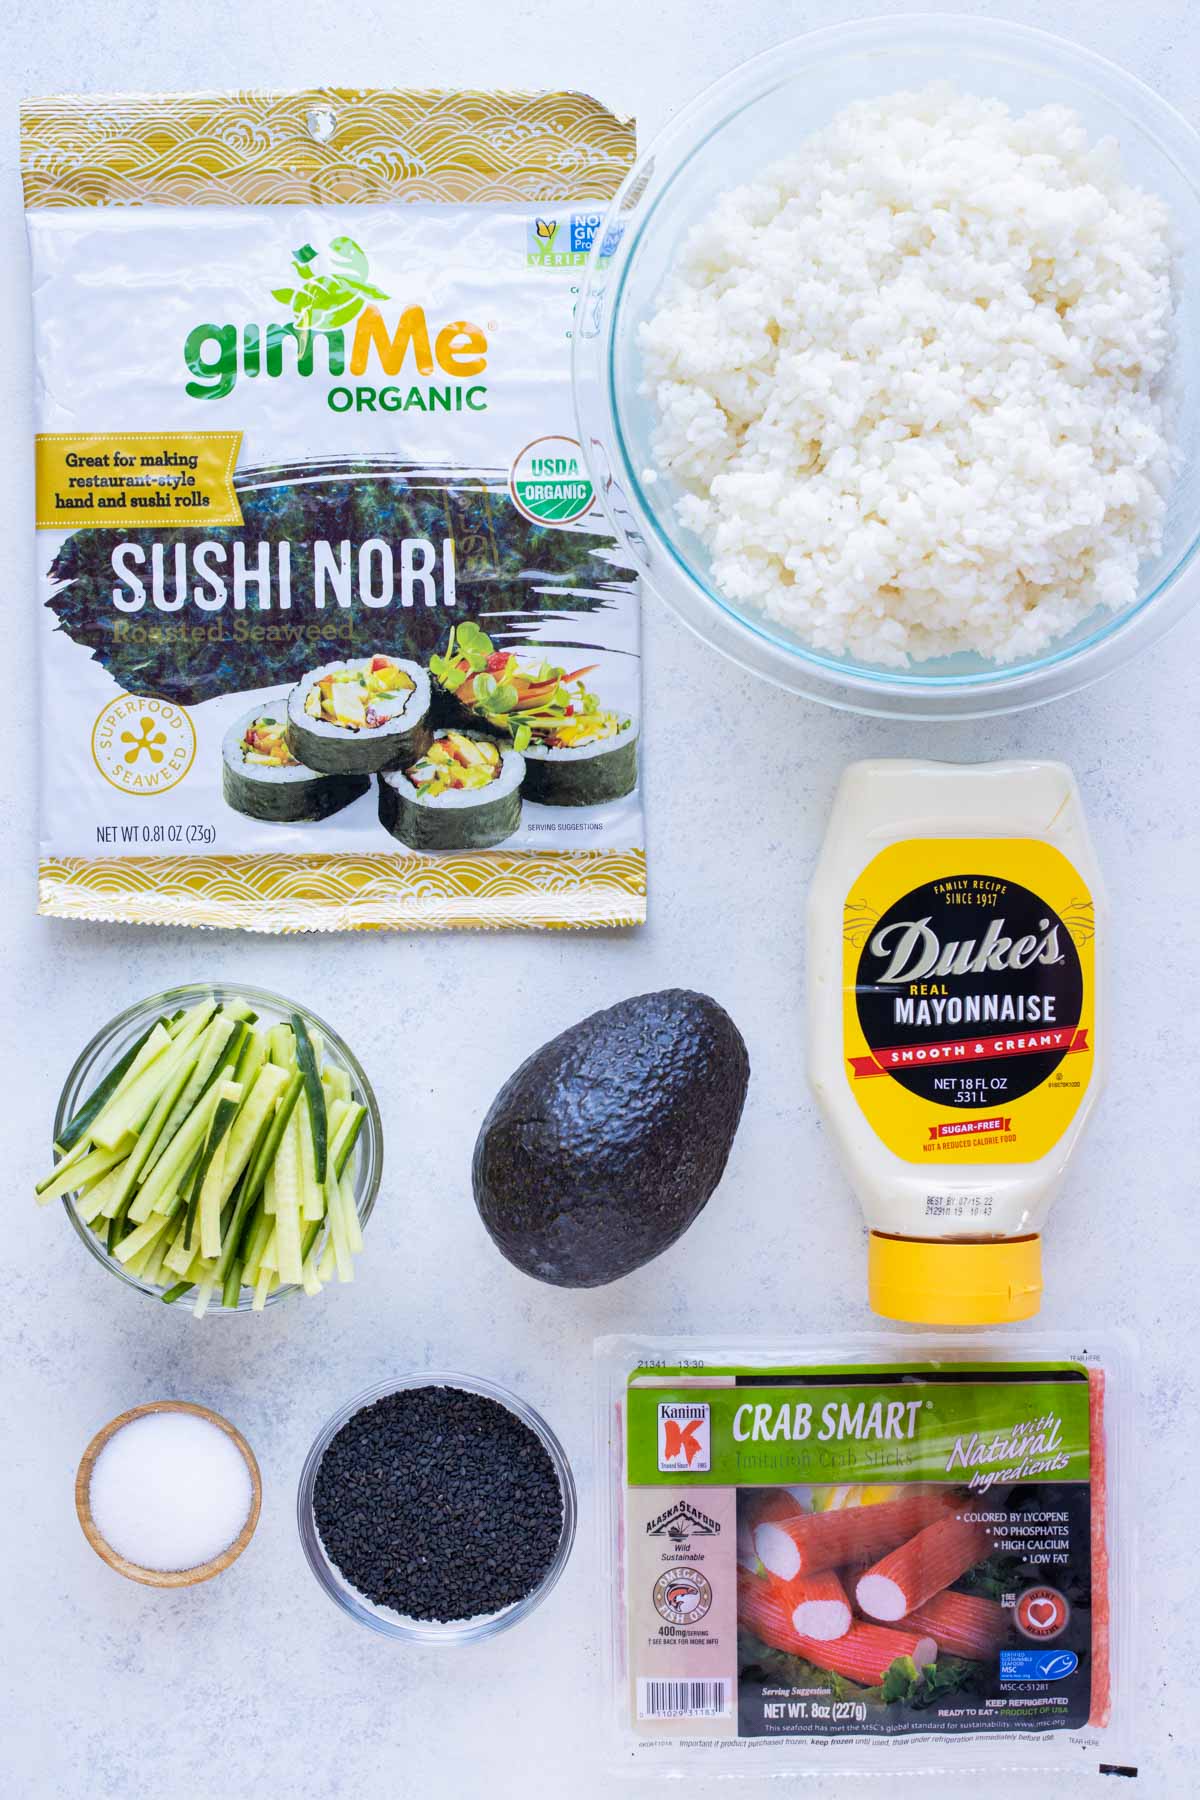 Nori, sushi rice, cucumber, avocado, crab meat, mayo, salt, and sesame seeds are the ingredients in this recipe.